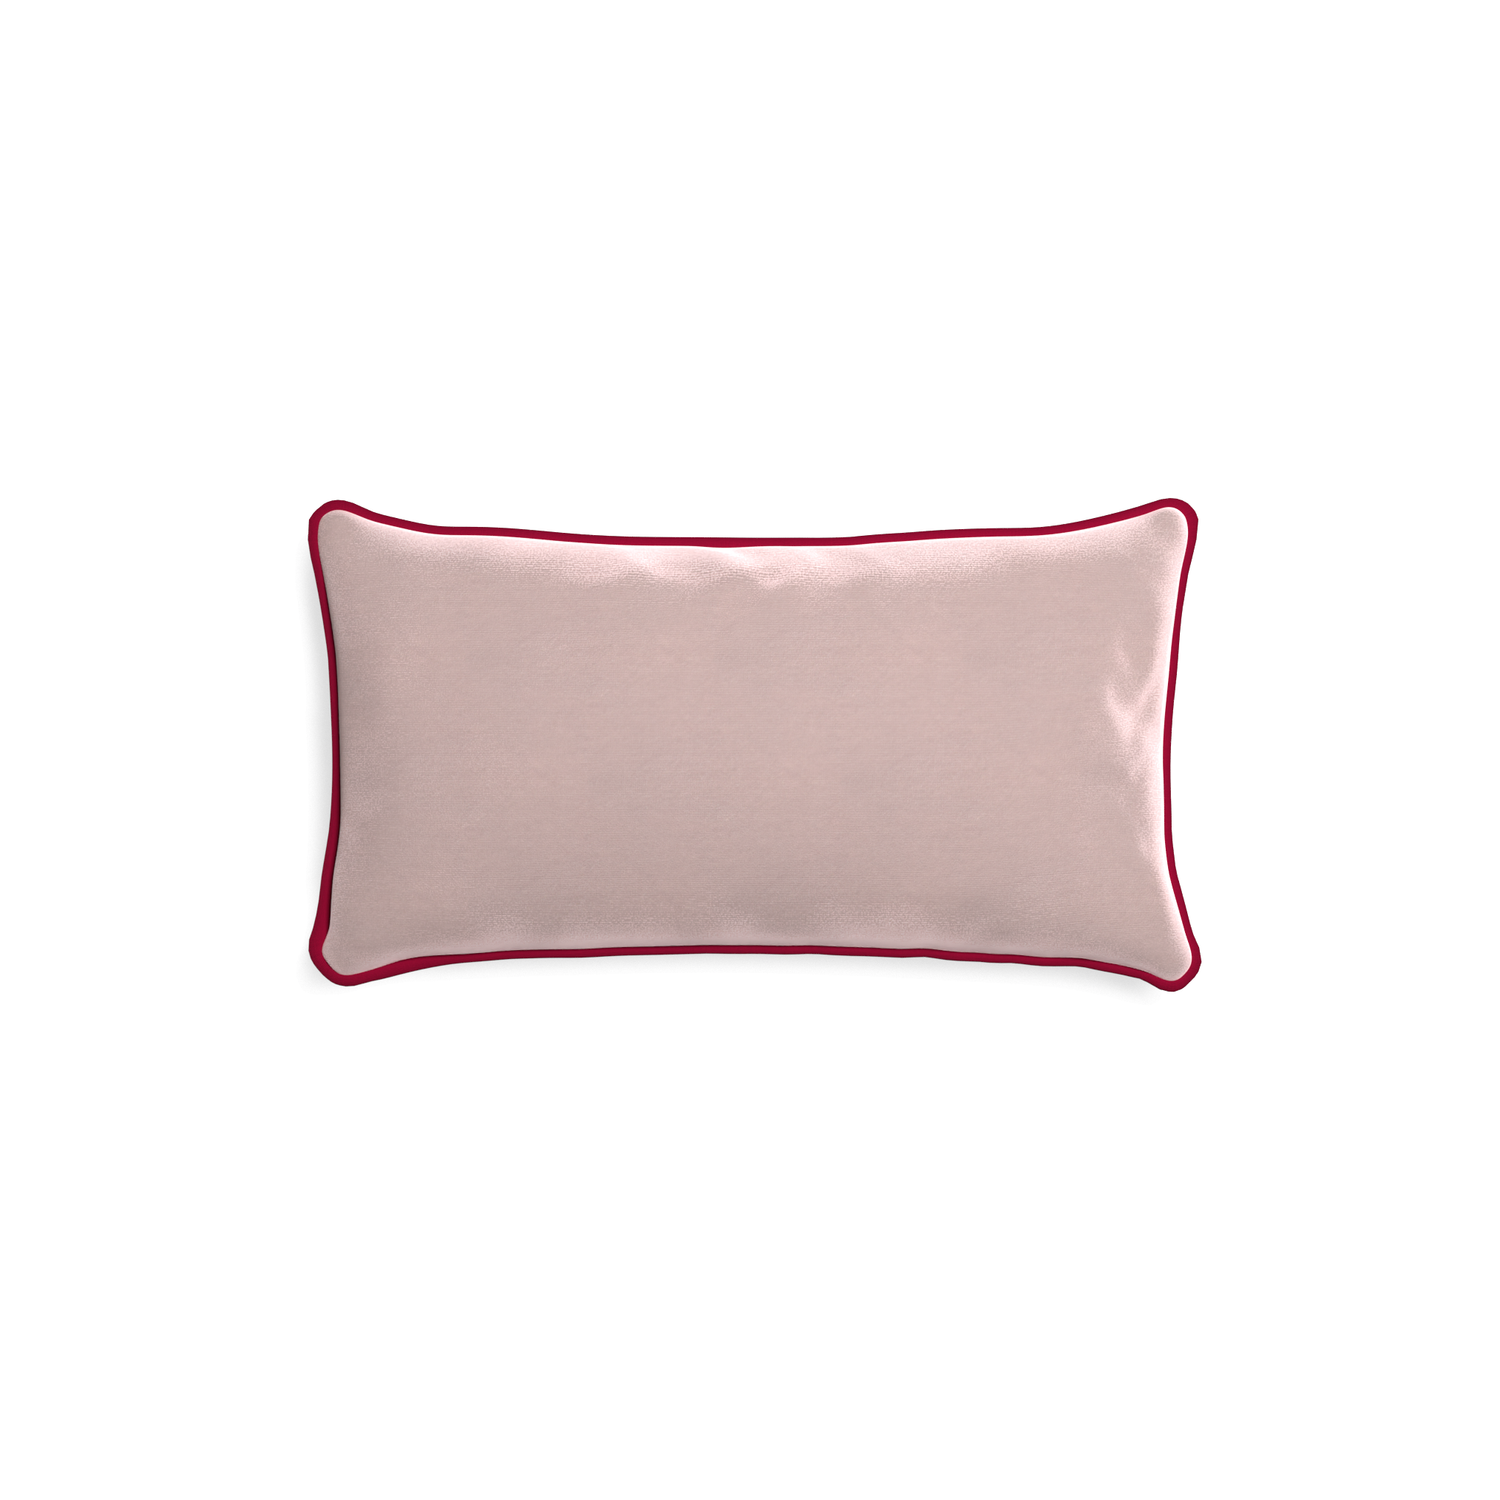 rectangle light pink velvet pillow with dark red piping